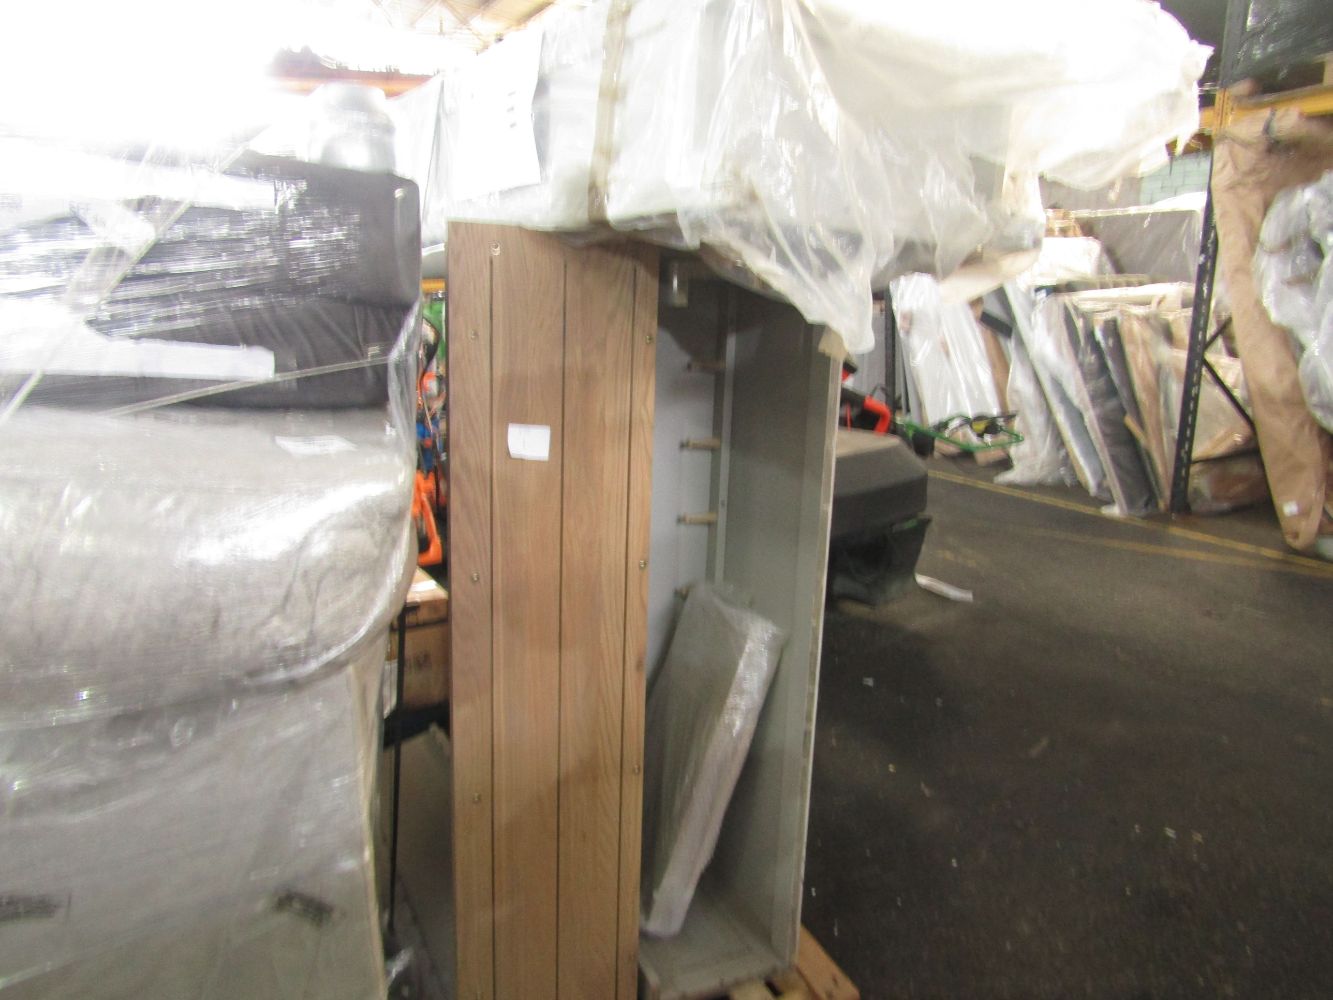 Upcyclers B.E.R pallets of customer return Sofas and furniture from Heals, Swoon, SCS, Oak furniture land and more